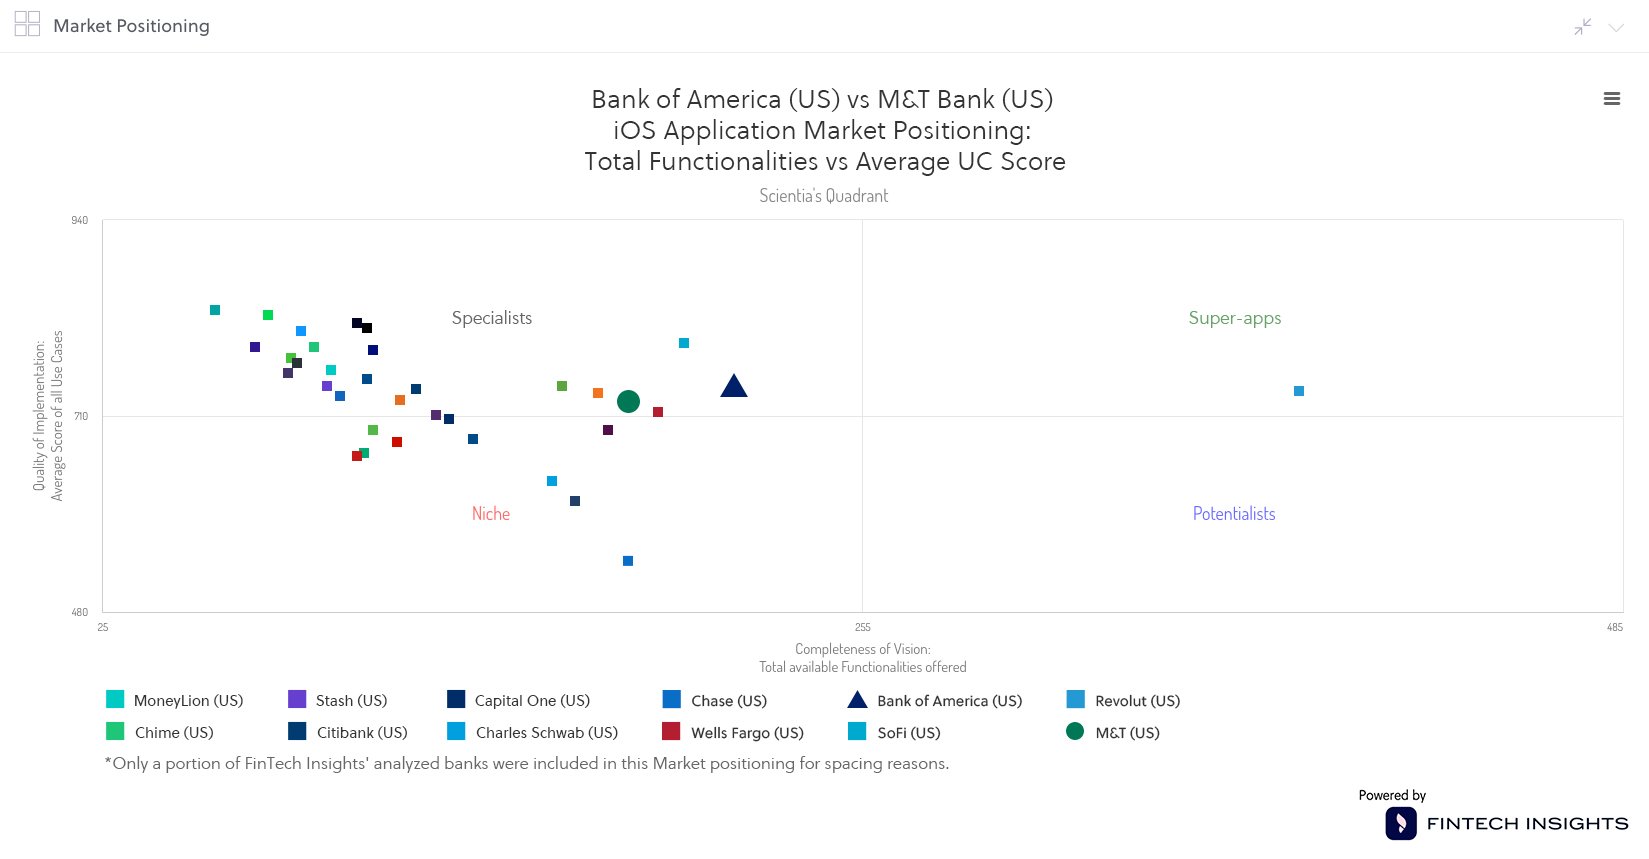 Positioning in the iOS app of M&T Bank and BofA in the US 